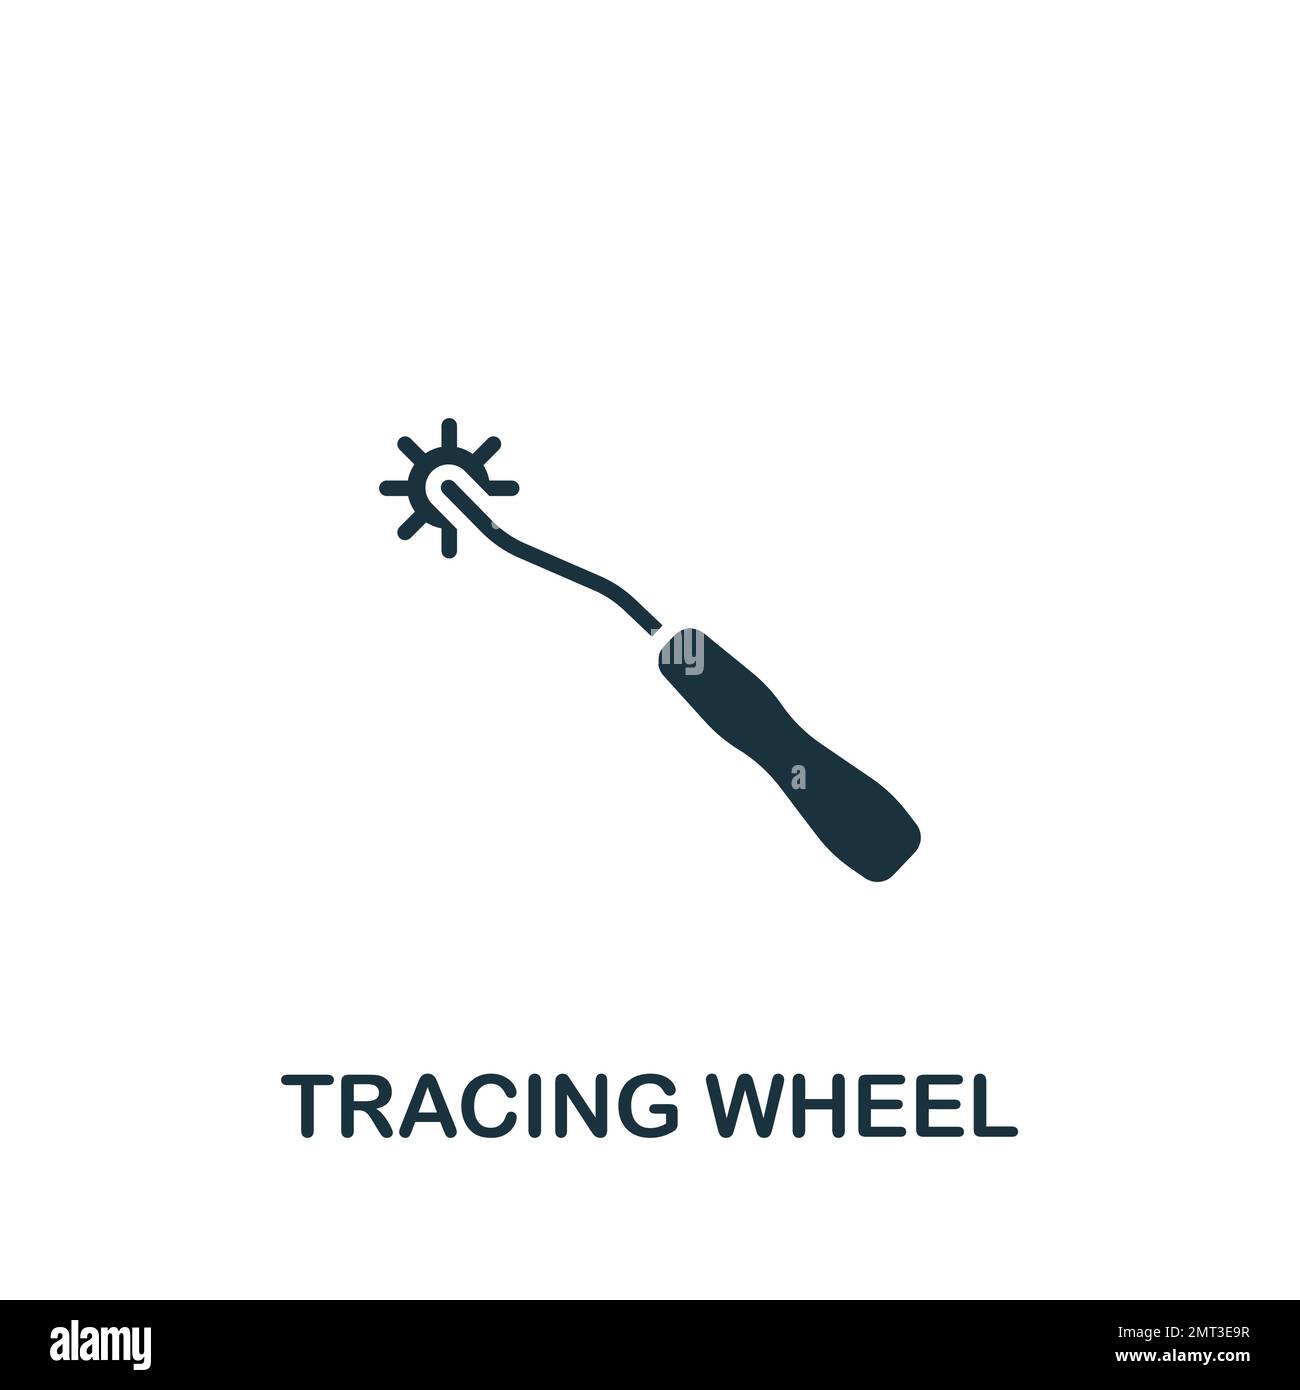 Tracing wheel icon. Monochrome simple sign from construction instruments collection. Tracing wheel icon for logo, templates, web design and Stock Vector